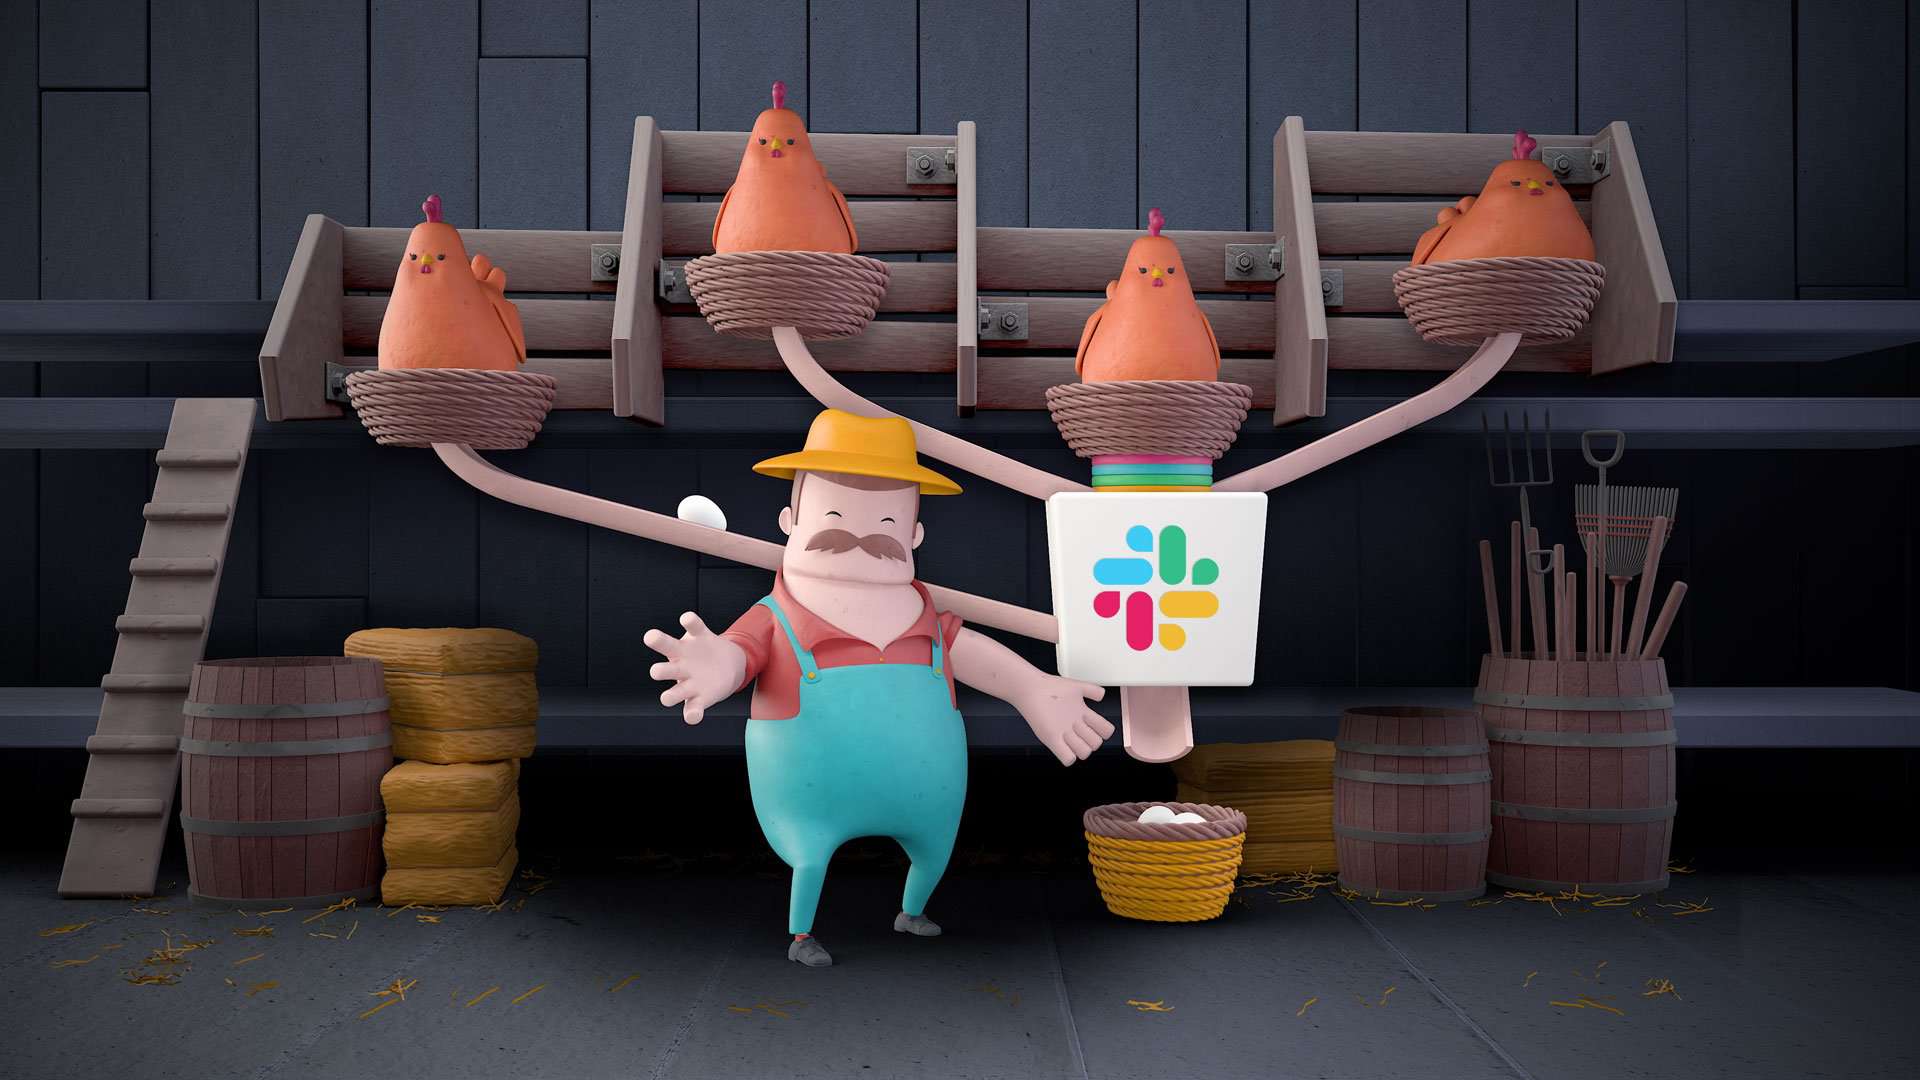 To be a small shot in larger animation about Slack services